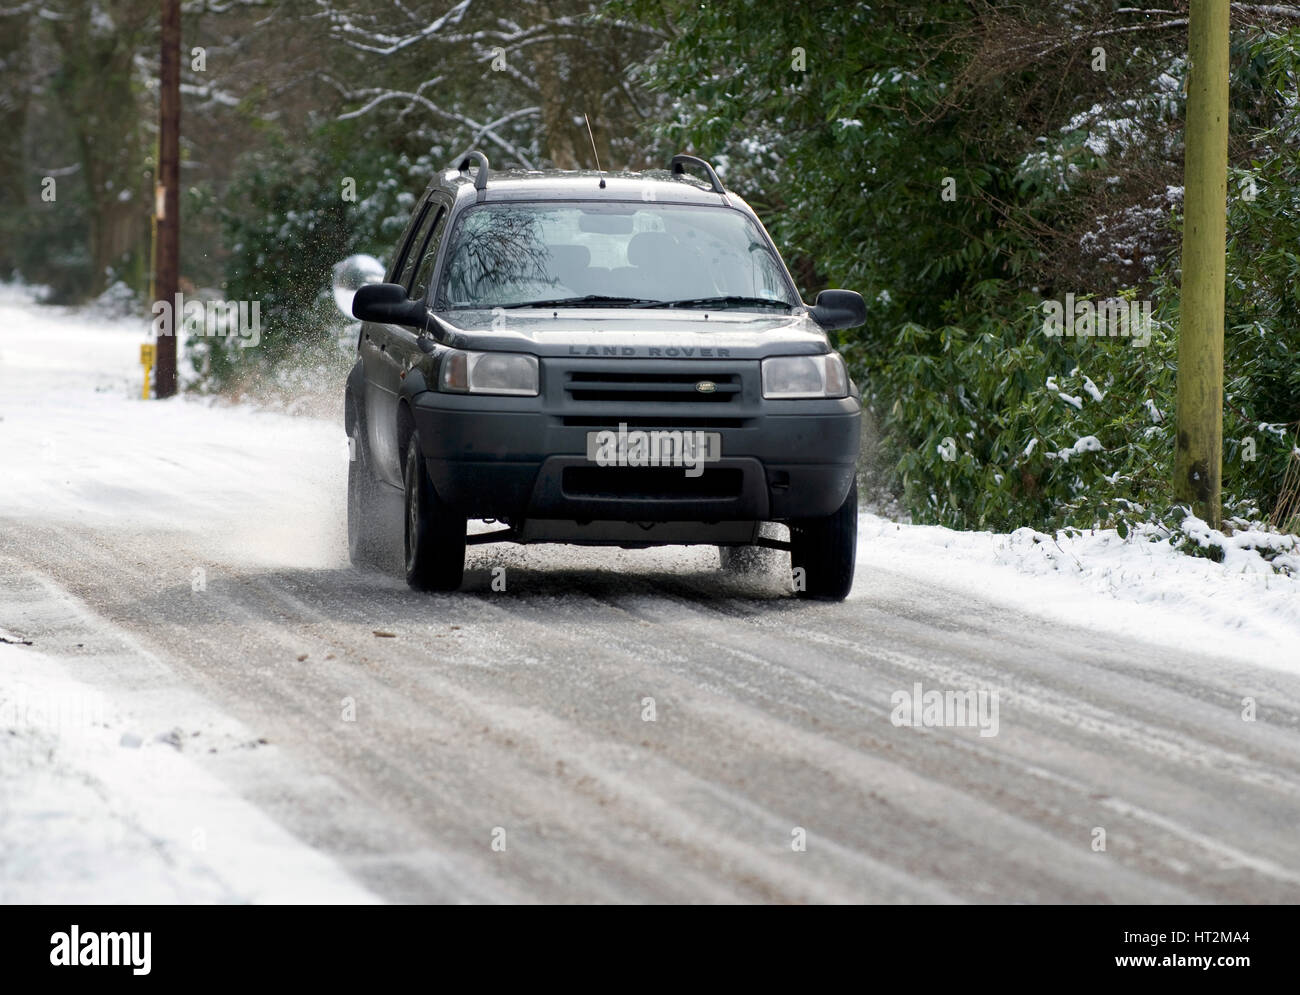 2001 Land Rover Freelander driving on icy road Artist: Unknown. Stock Photo